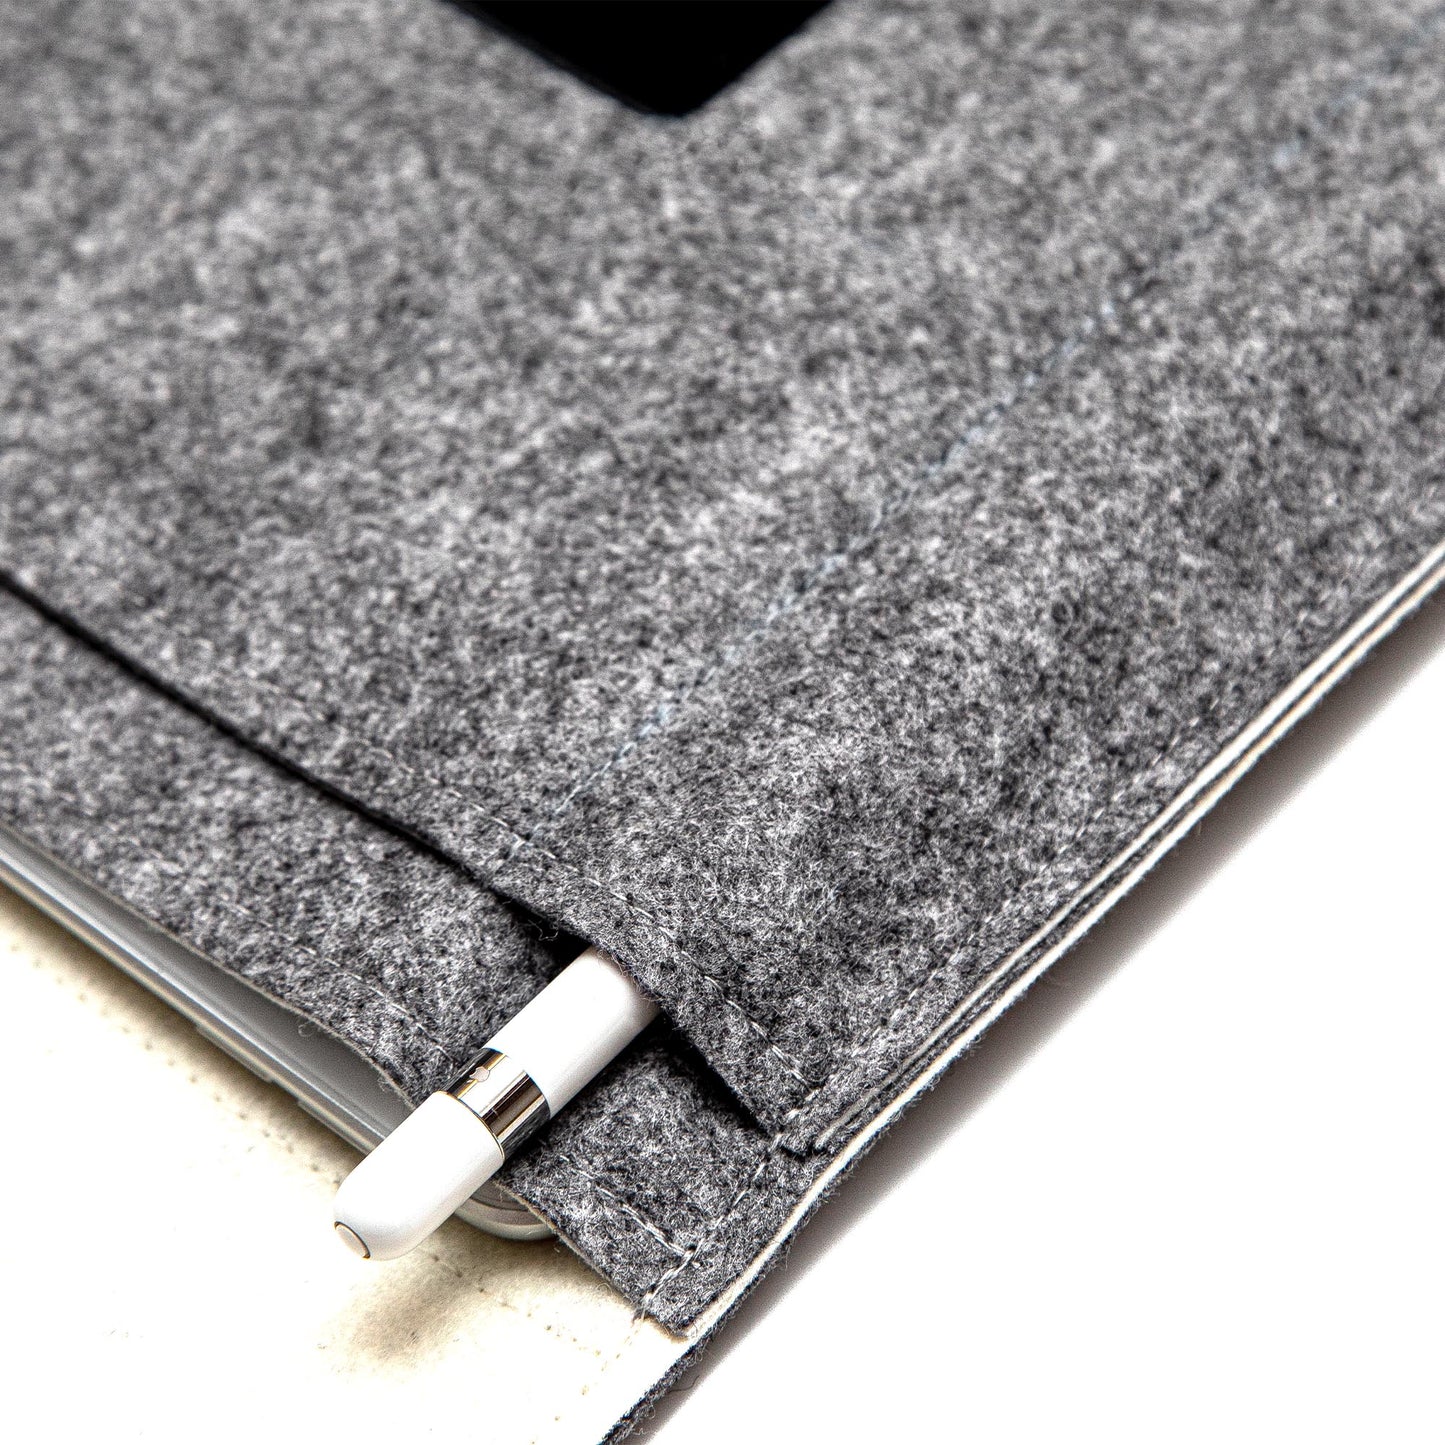 Premium Felt iPad Cover: Ultimate Protection with Accessories Pocket - Grey & Cream